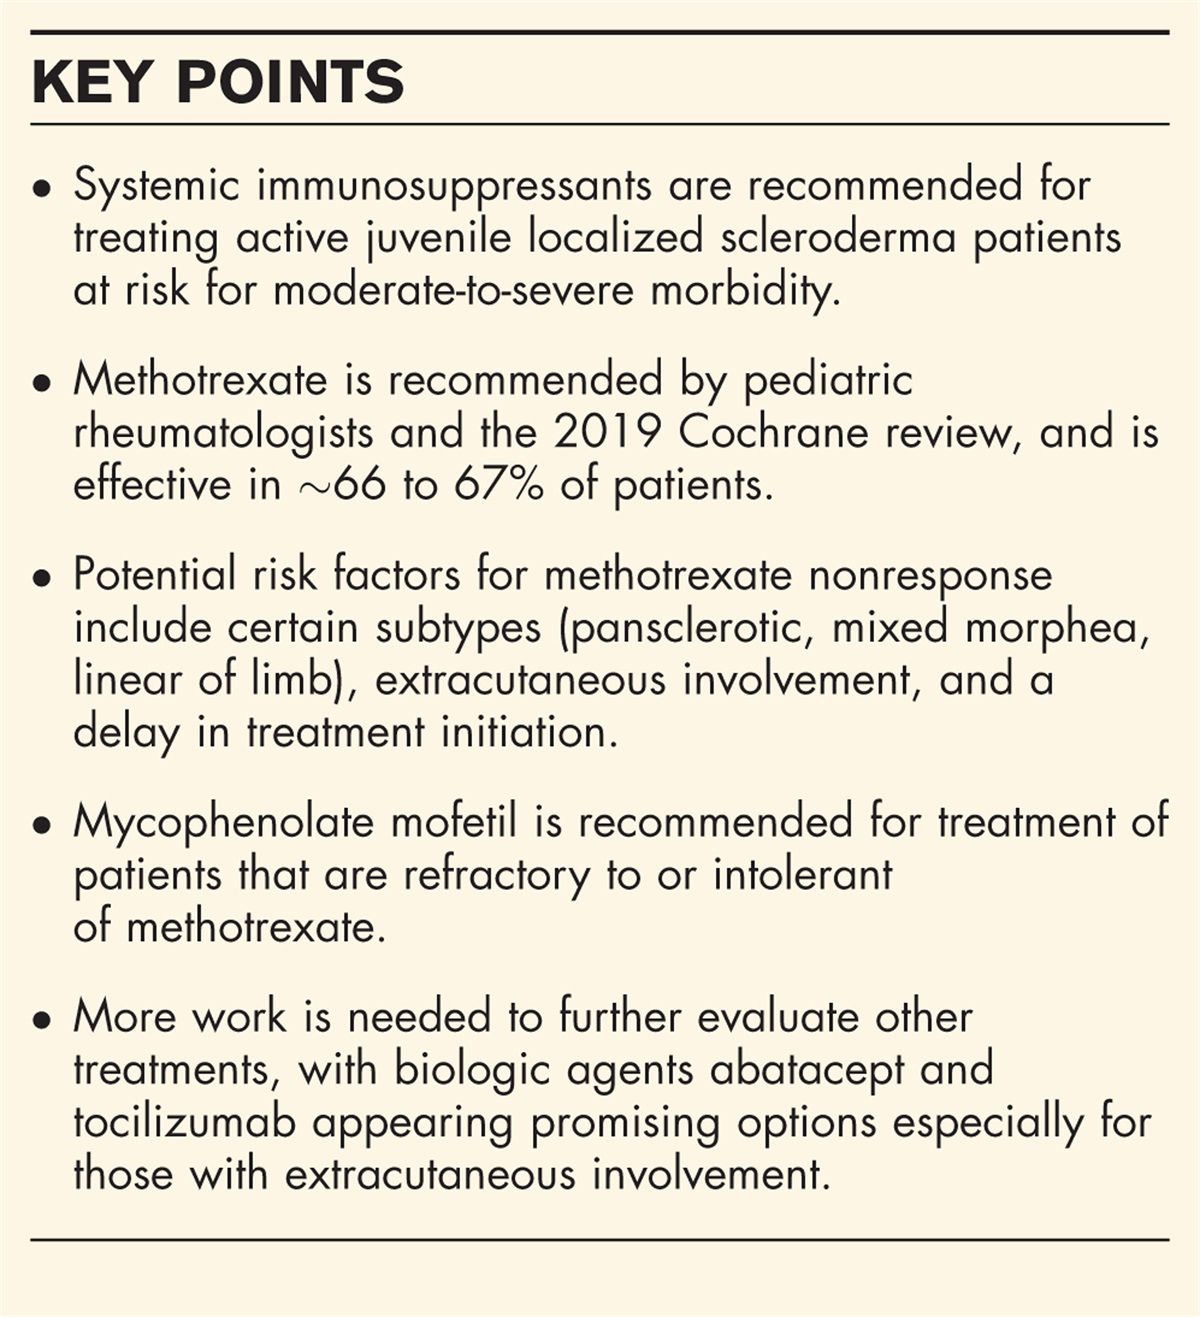 Treatment of juvenile localized scleroderma: current recommendations, response factors, and potential alternative treatments